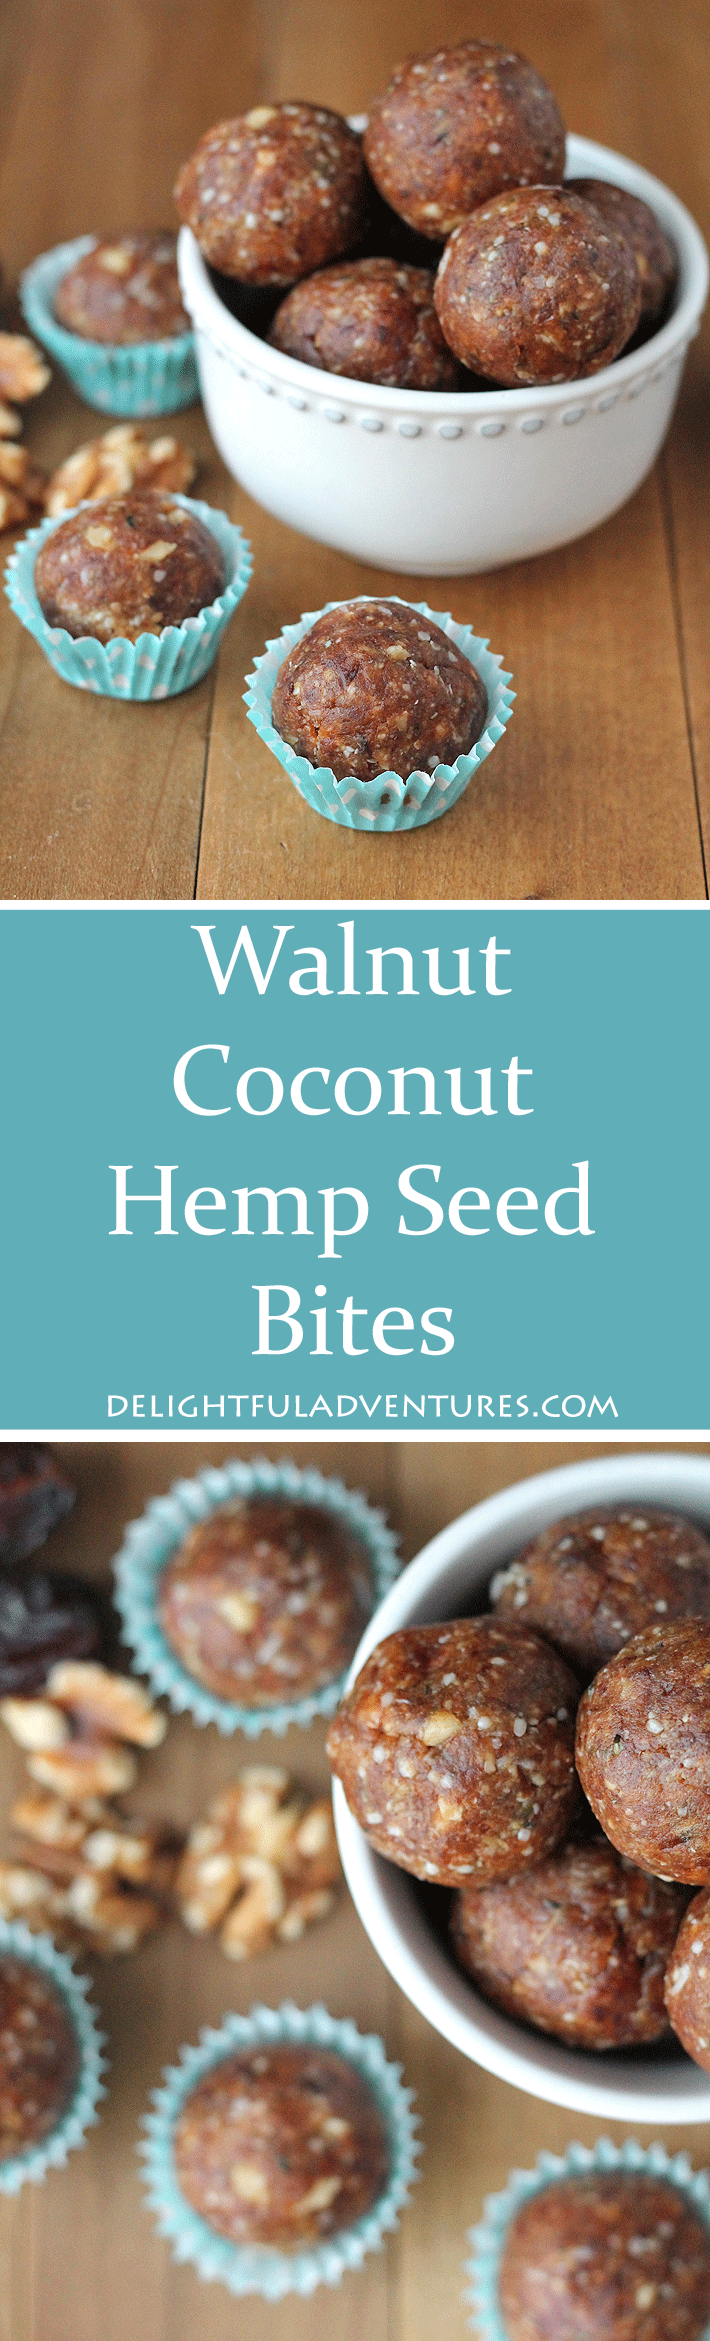 Just one of these naturally sweetened, nutritious, no bake walnut coconut hemp seed bites will kick your afternoon sugar craving to the curb!